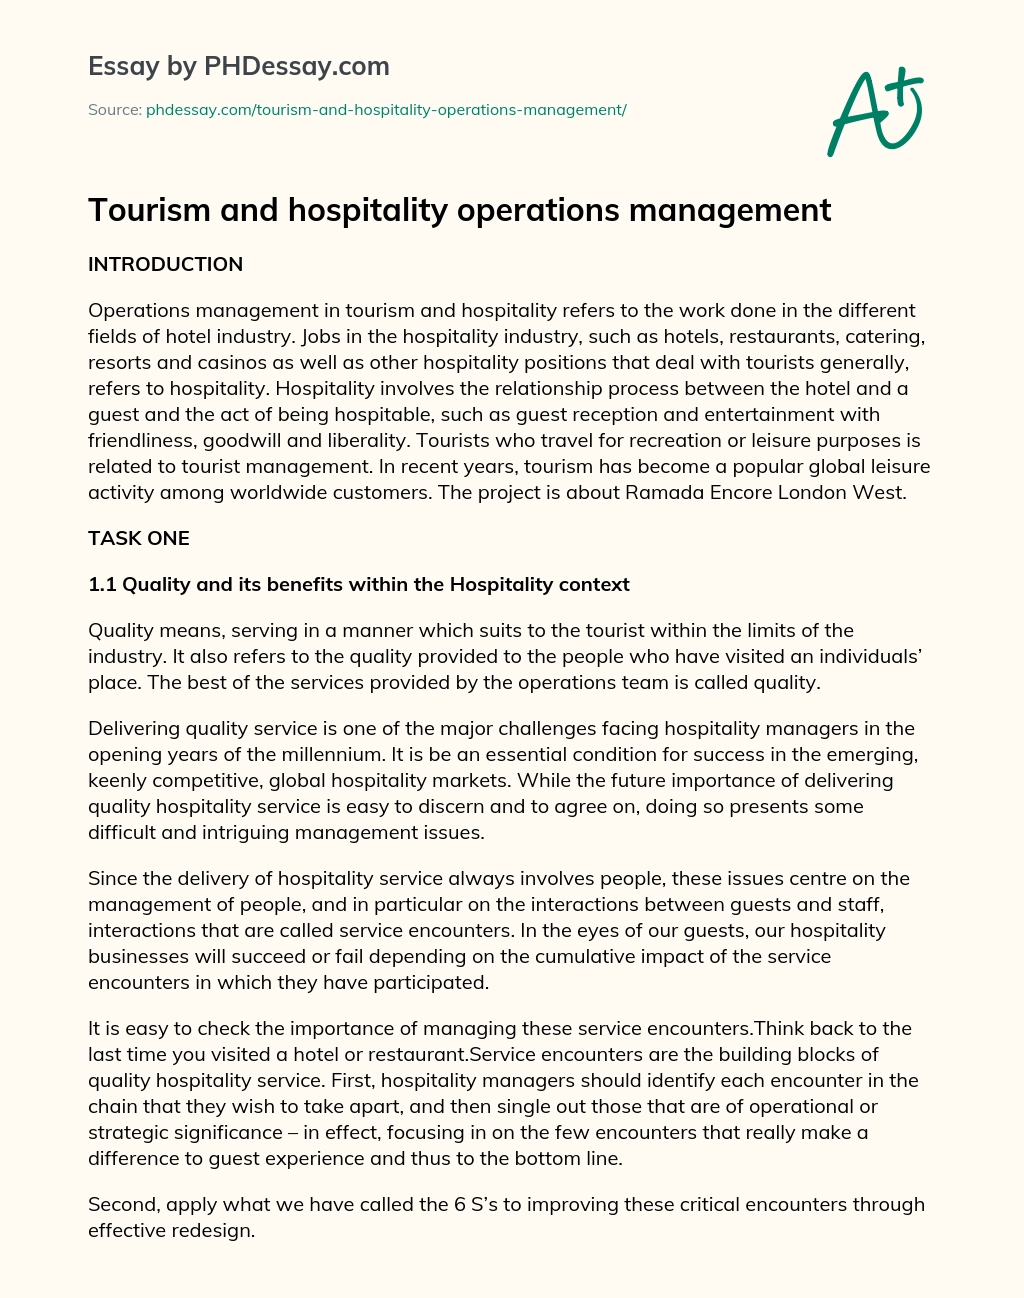 Tourism and hospitality operations management essay